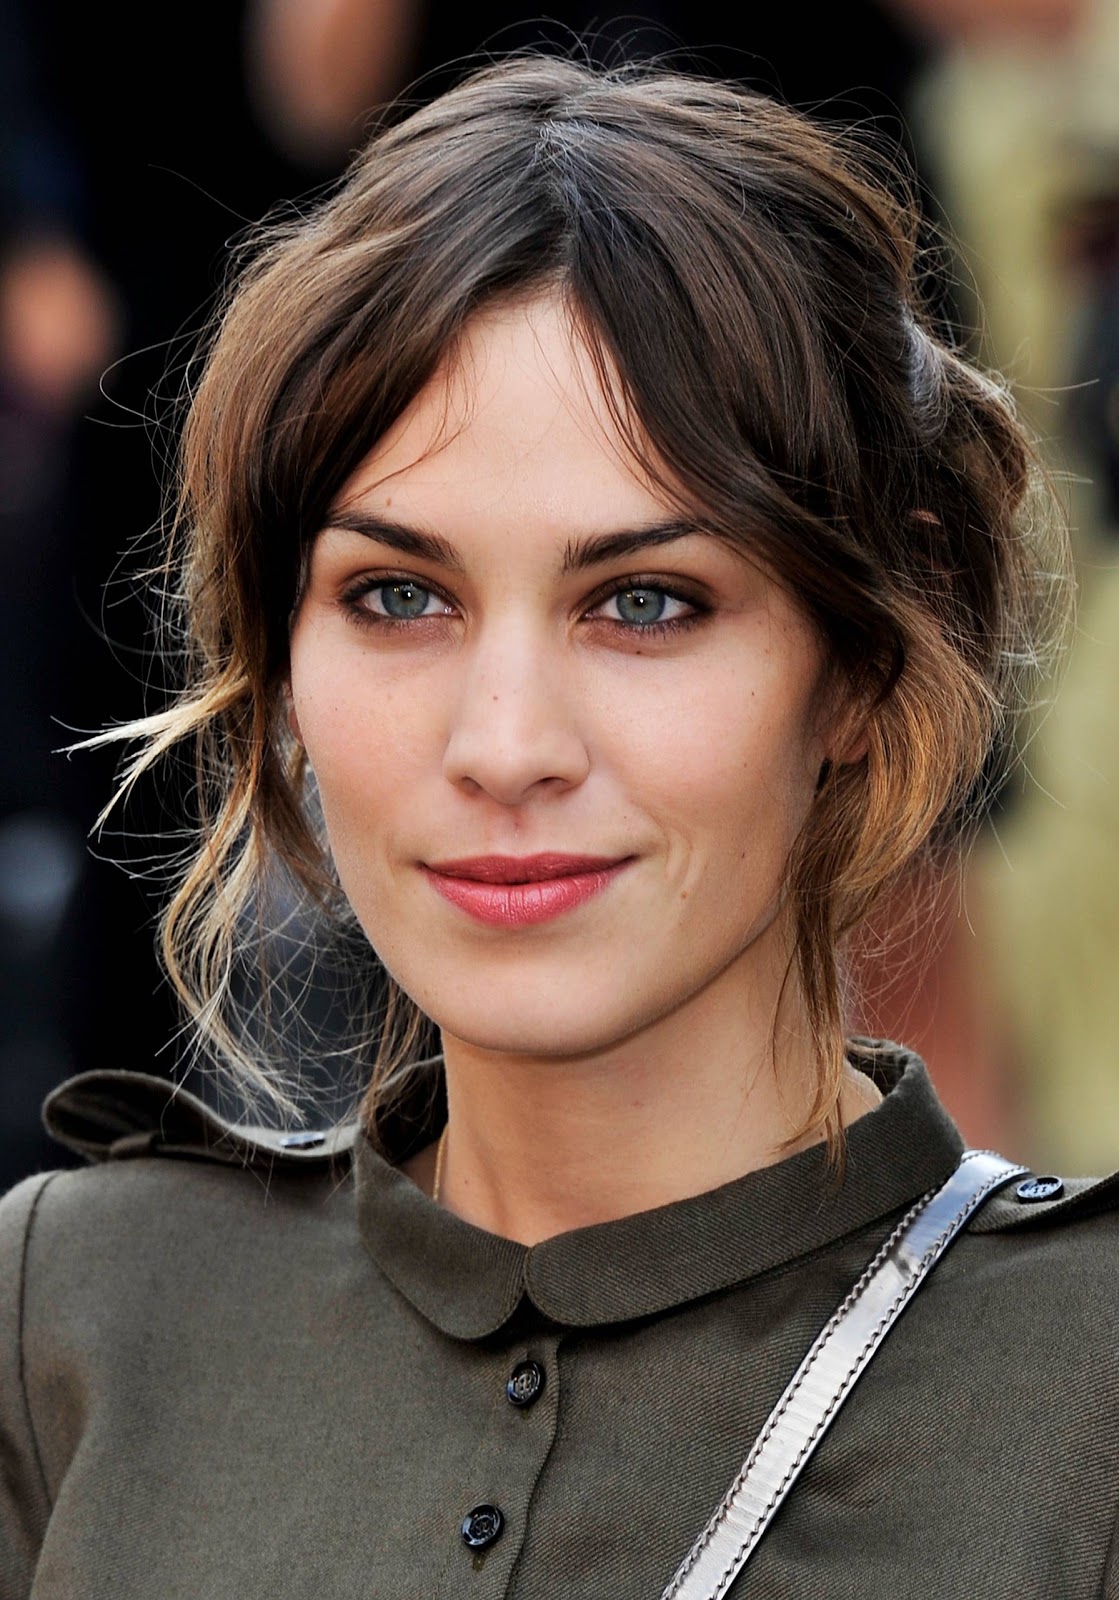 Alexa Chung - The Hottest Short Hairstyles for Women in 2011 title=